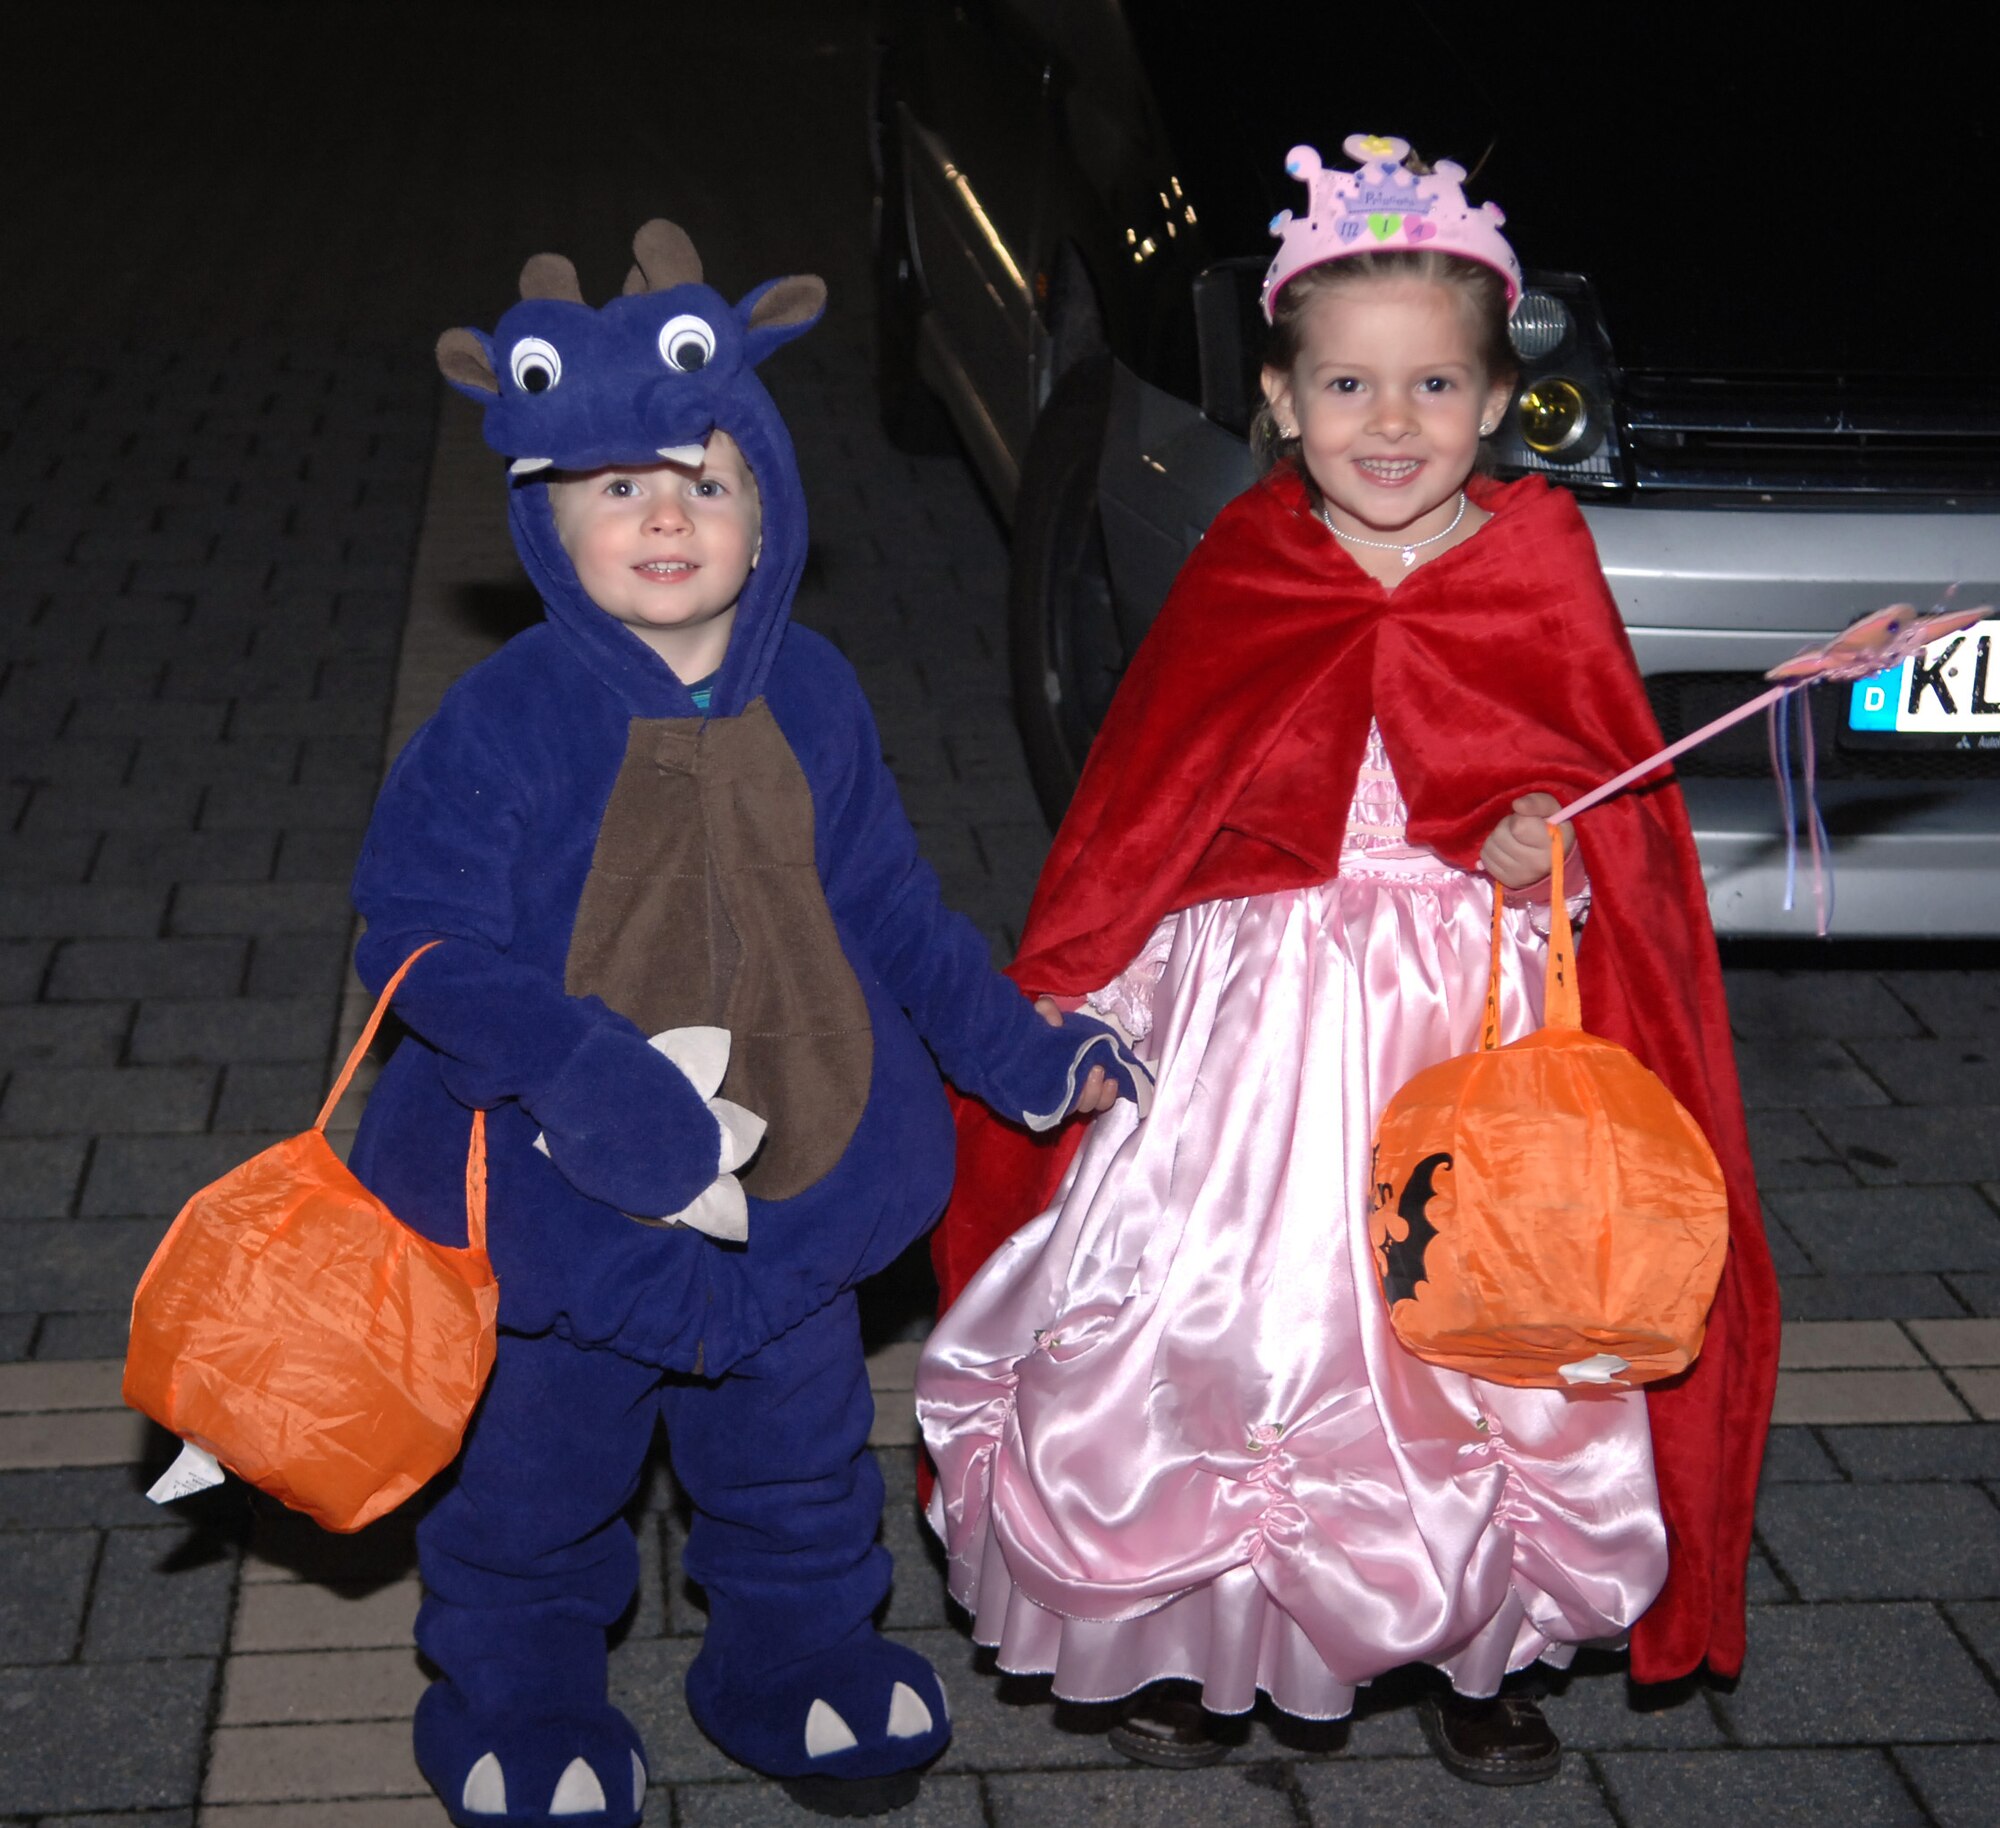 Bradley and Mia Drake, dependents of Rene and Staff Sgt. Alan Drake, 886th Civil Engineer Squadron firefighter, pose in their Halloween costumes before heading out for a night of trick-or-treating, Oct. 31, 2009. This year many of the housing areas on Ramstein Air Base as well as local German communities were filled with the more than 54 thousand Kaiserslautern Military Community servicemembers enjoying Halloween. (U.S. Air Force photo by Tech. Sgt. Michael Voss)